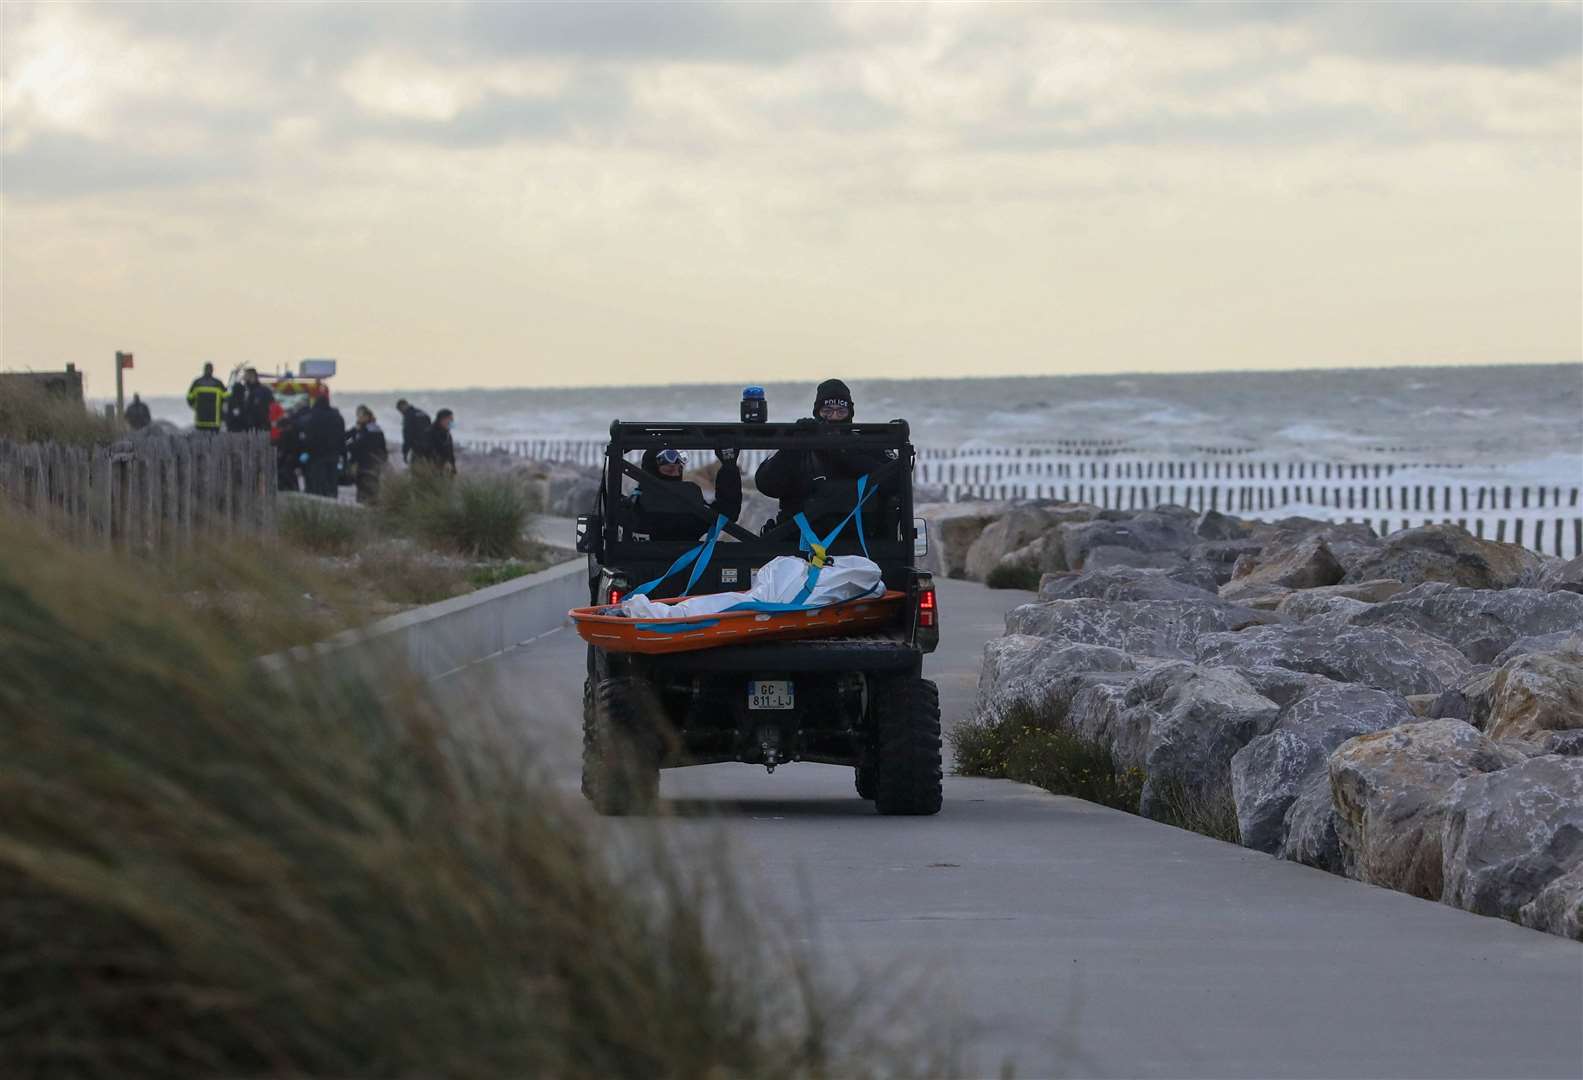 Emergency services recover a body at a French beach in another fatal incident in the Channel